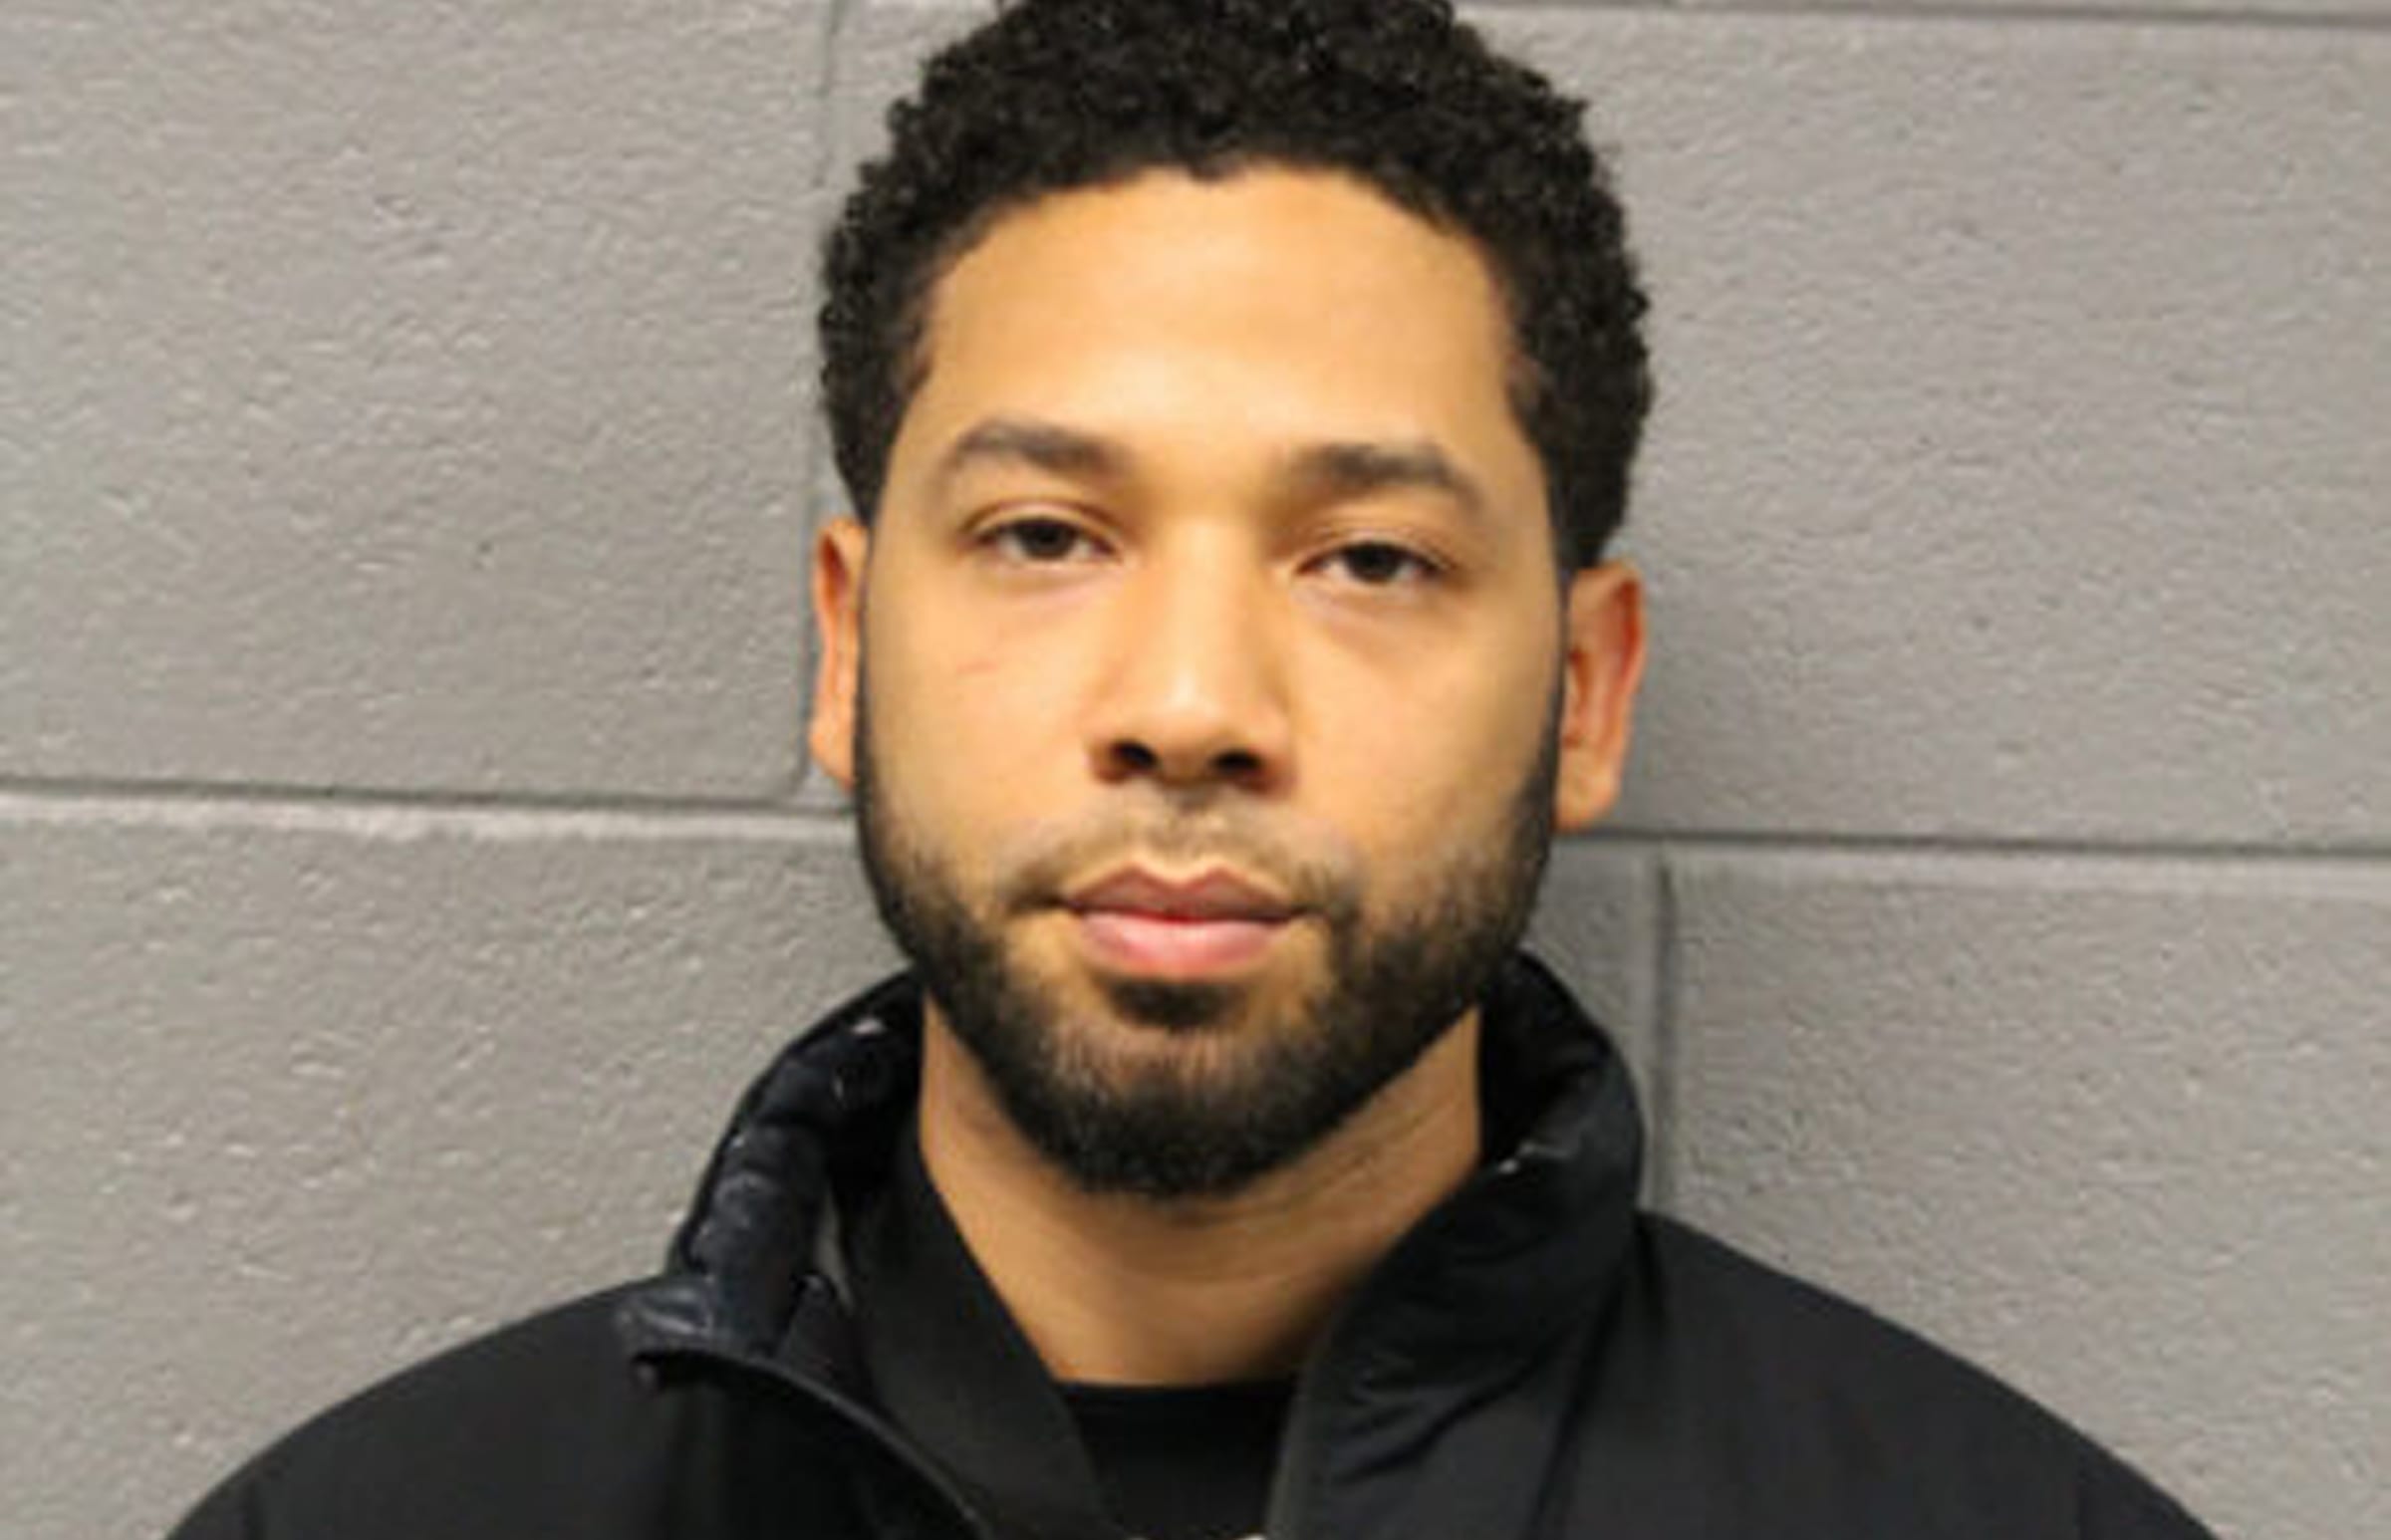 Jussie Smollett turned himself into the Chicago Police Department.